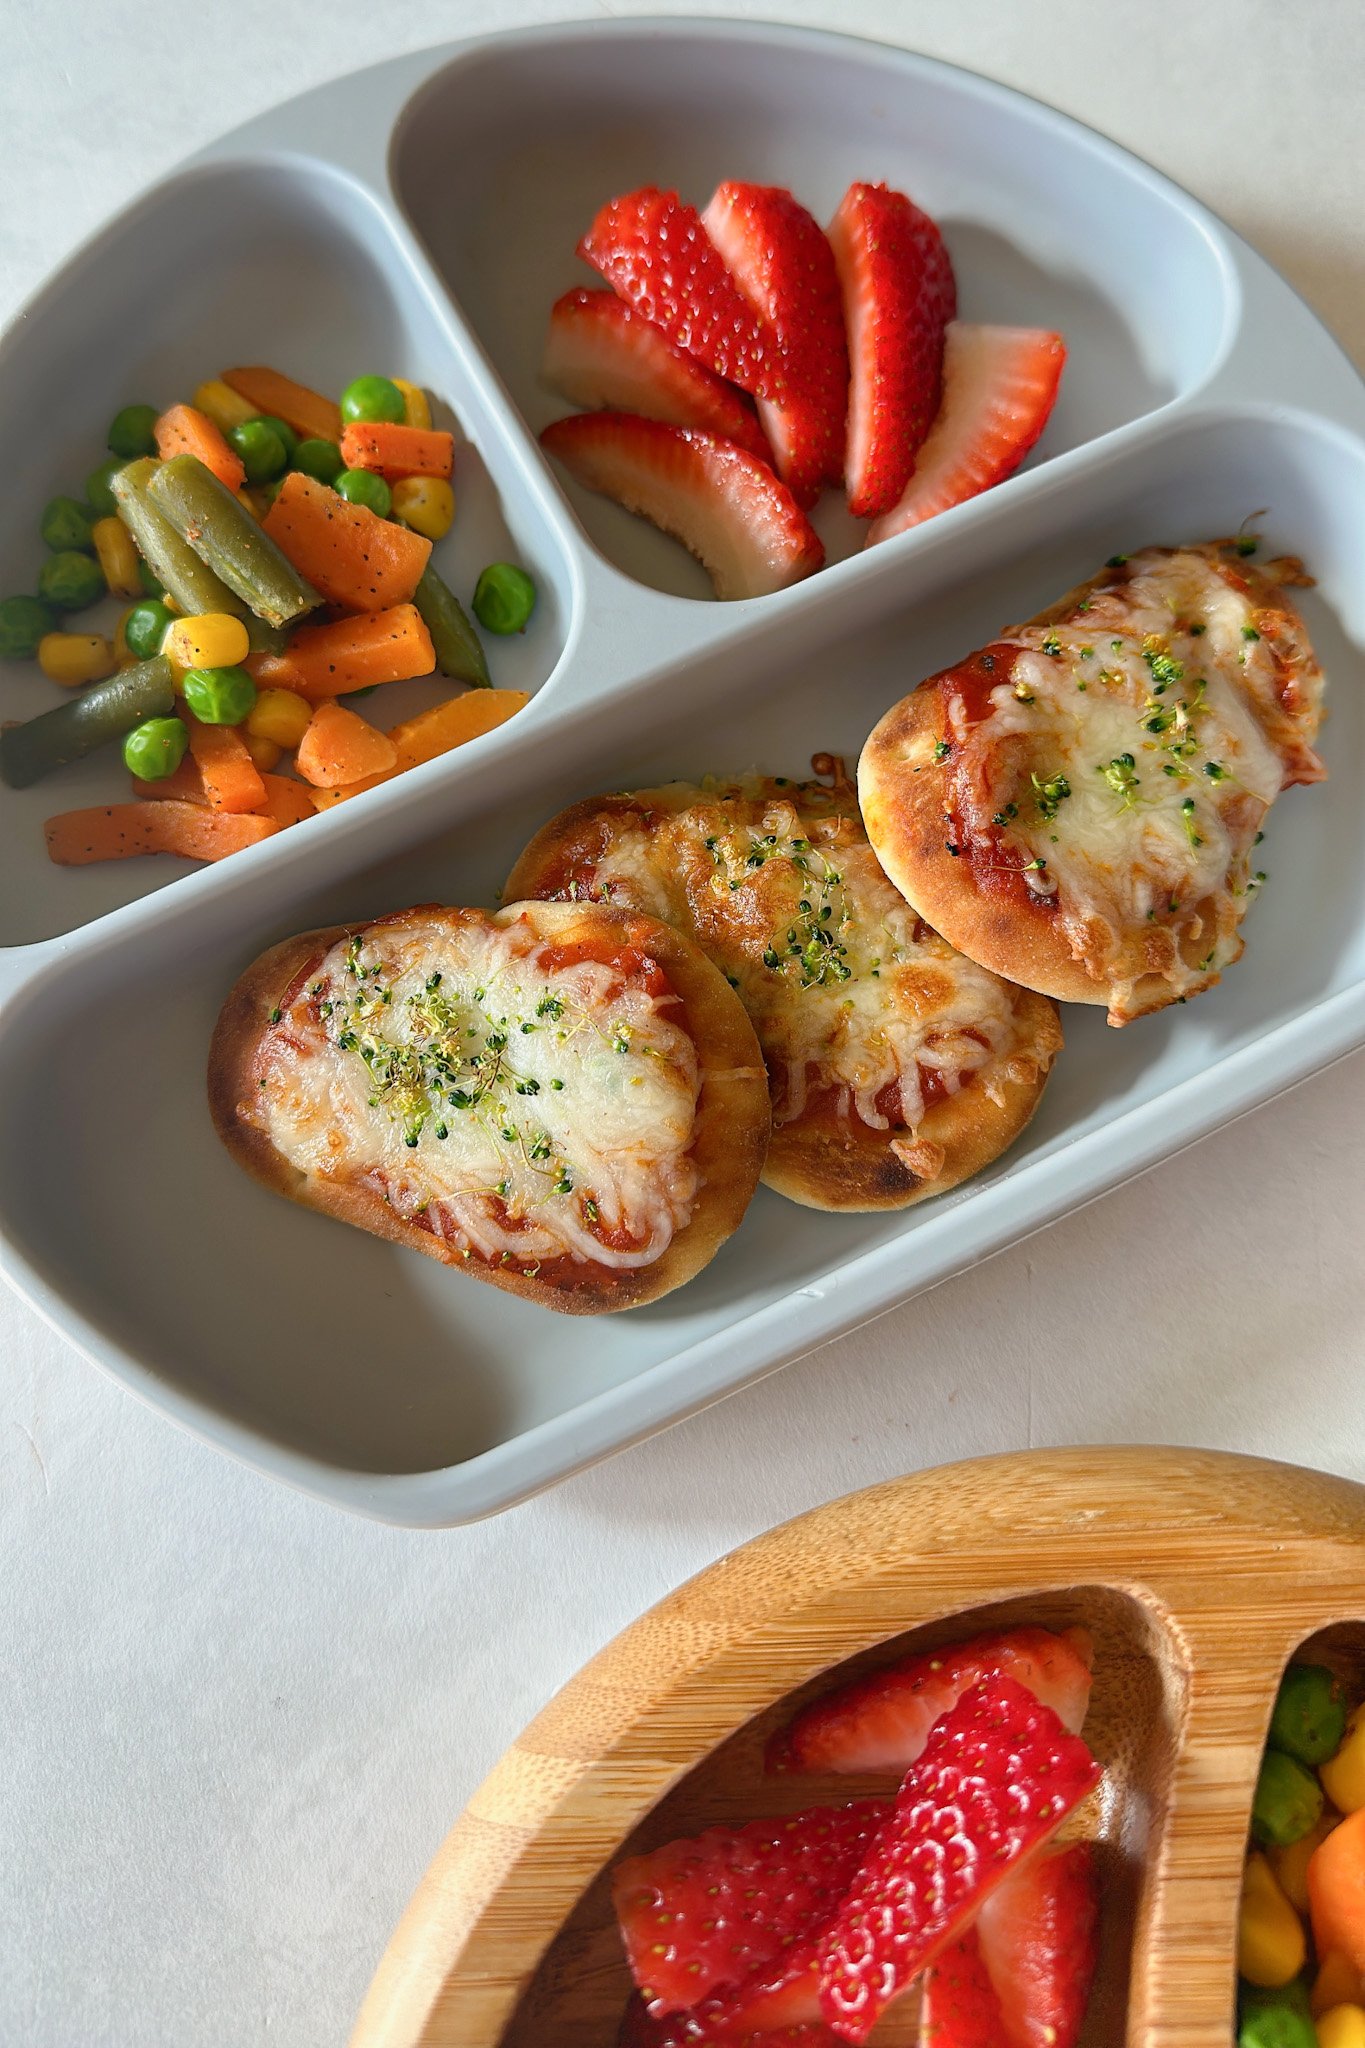 Air fryer naan pizzas served with strawberries and mixed vegetables.